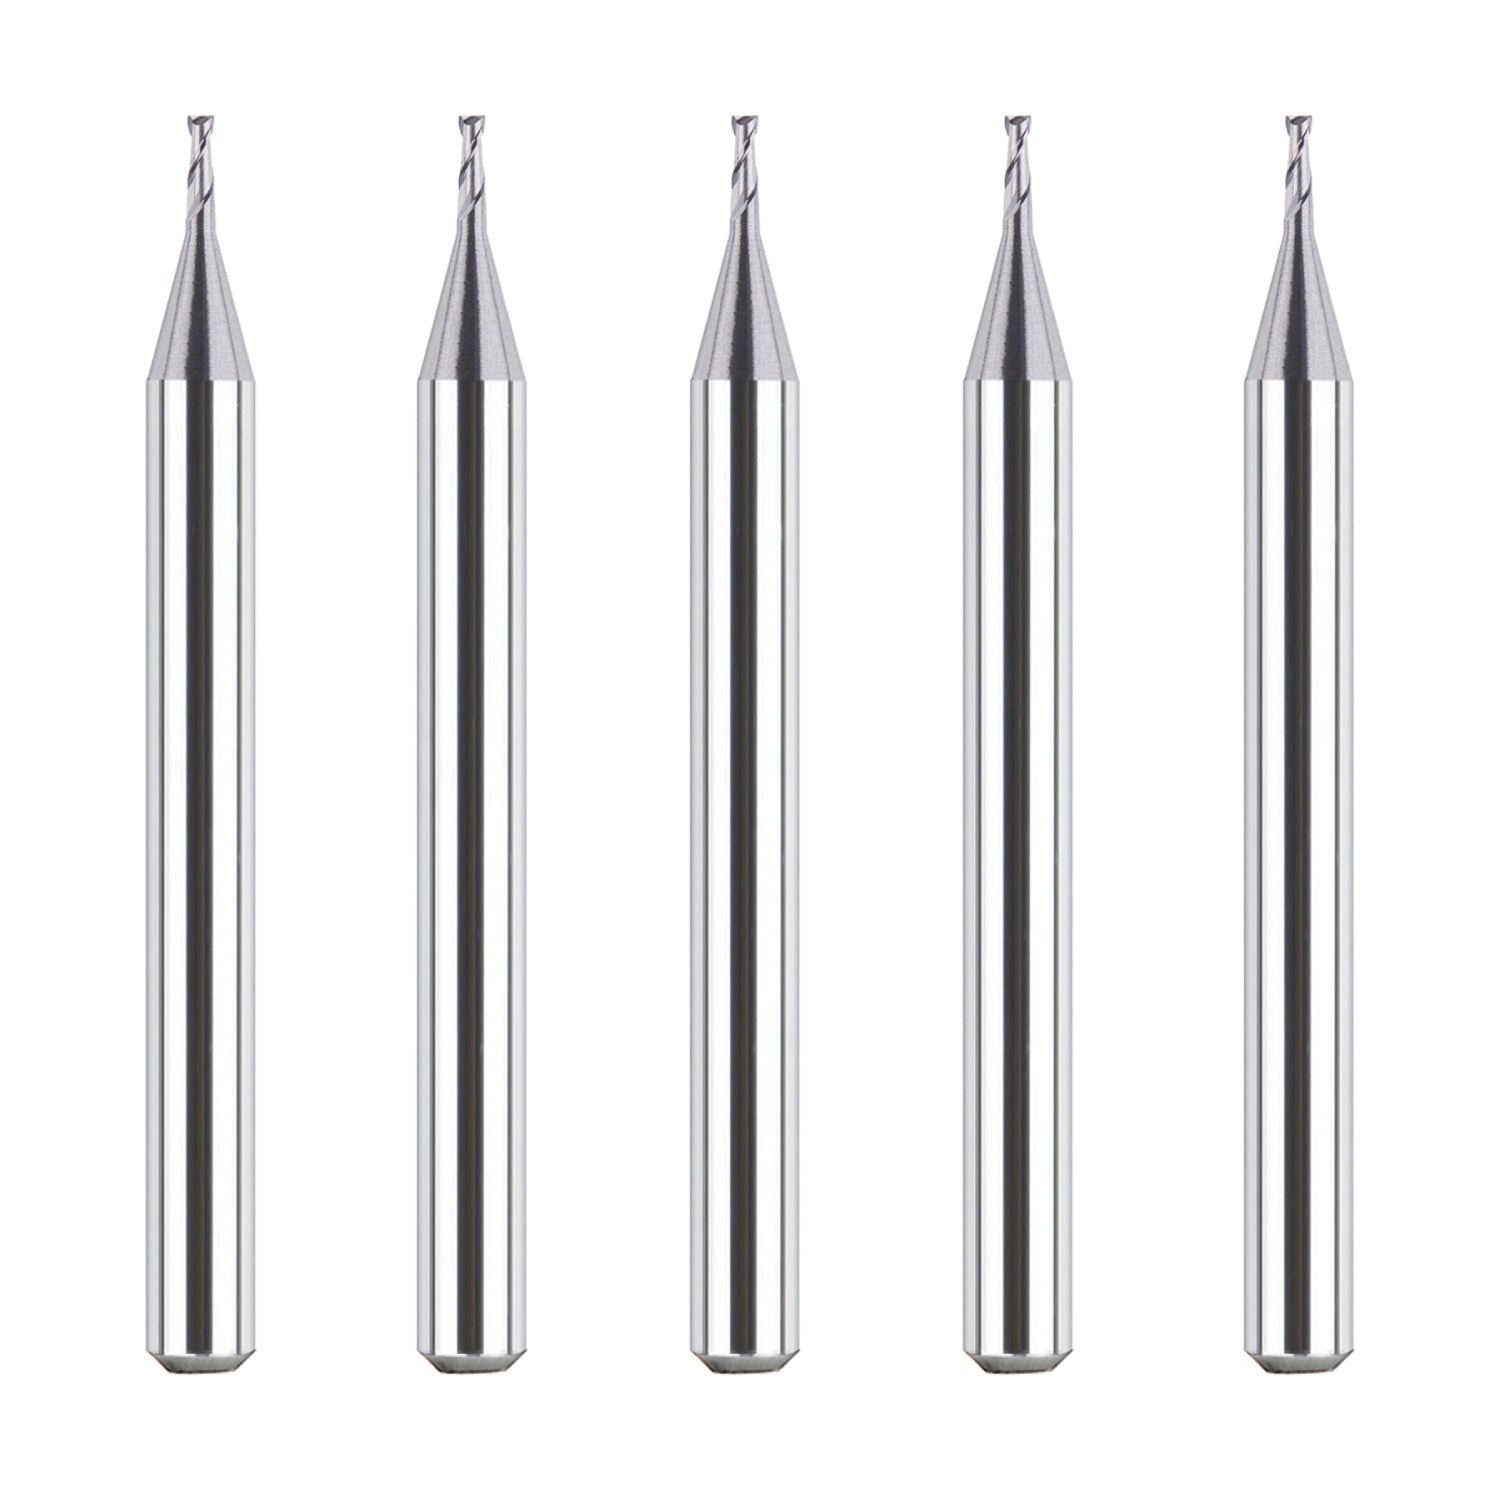 SpeTool 5Pcs/Set Flat Nose 2 Flute 1/32" Dia Carbide End Mill For Steel Maching